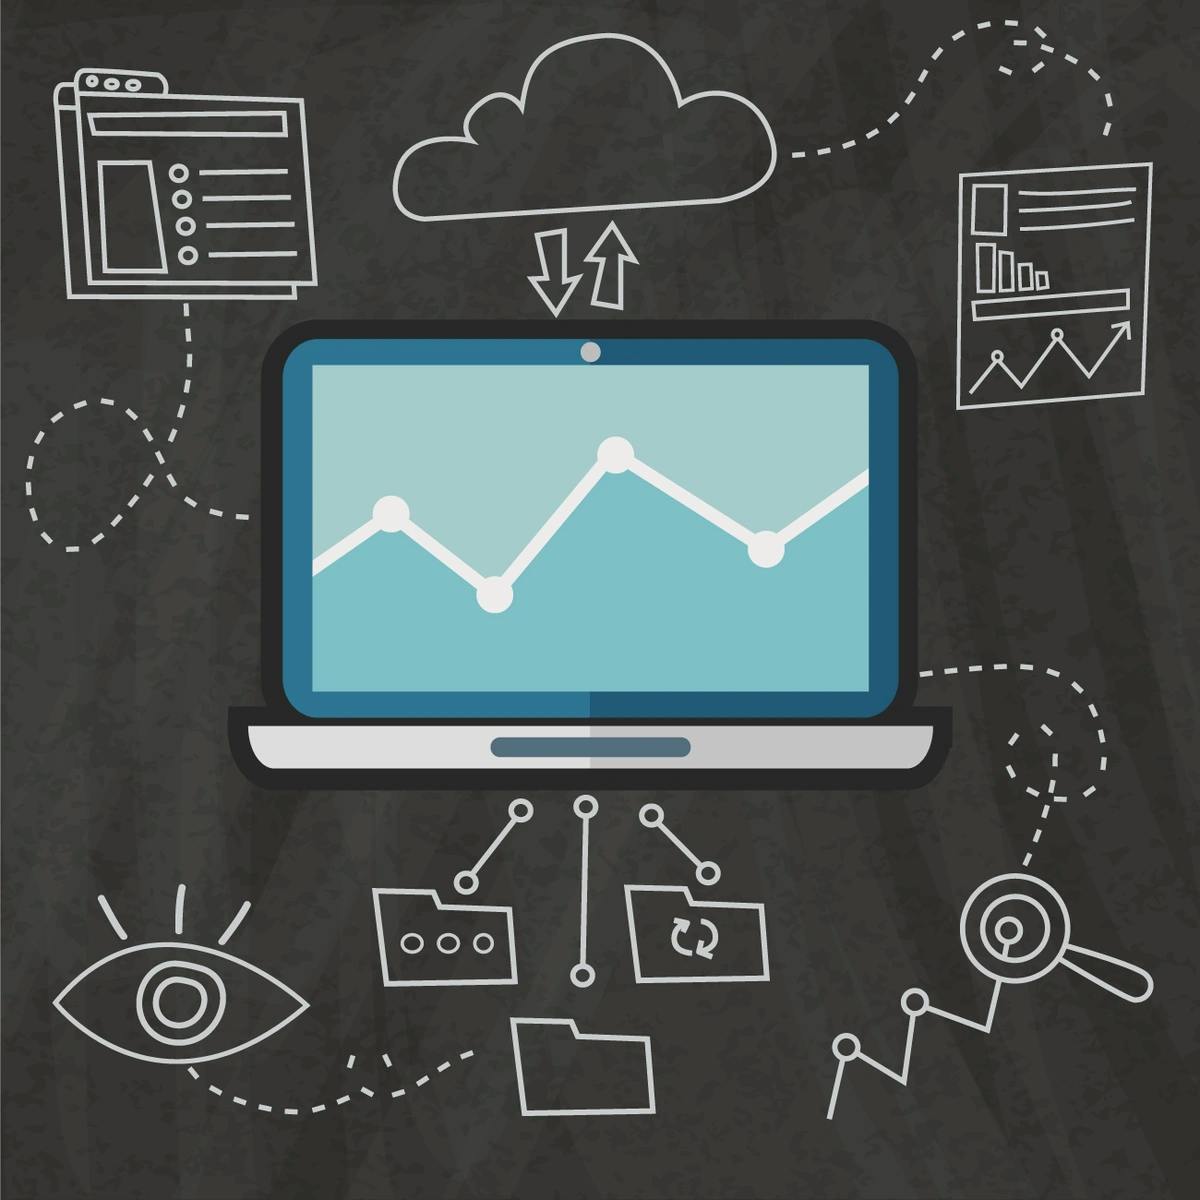 A chalkboard-style illustration featuring a laptop with a graph on the screen connected to various business and technology icons such as cloud storage, documents, and search symbols, representing data analytics or online business concepts.